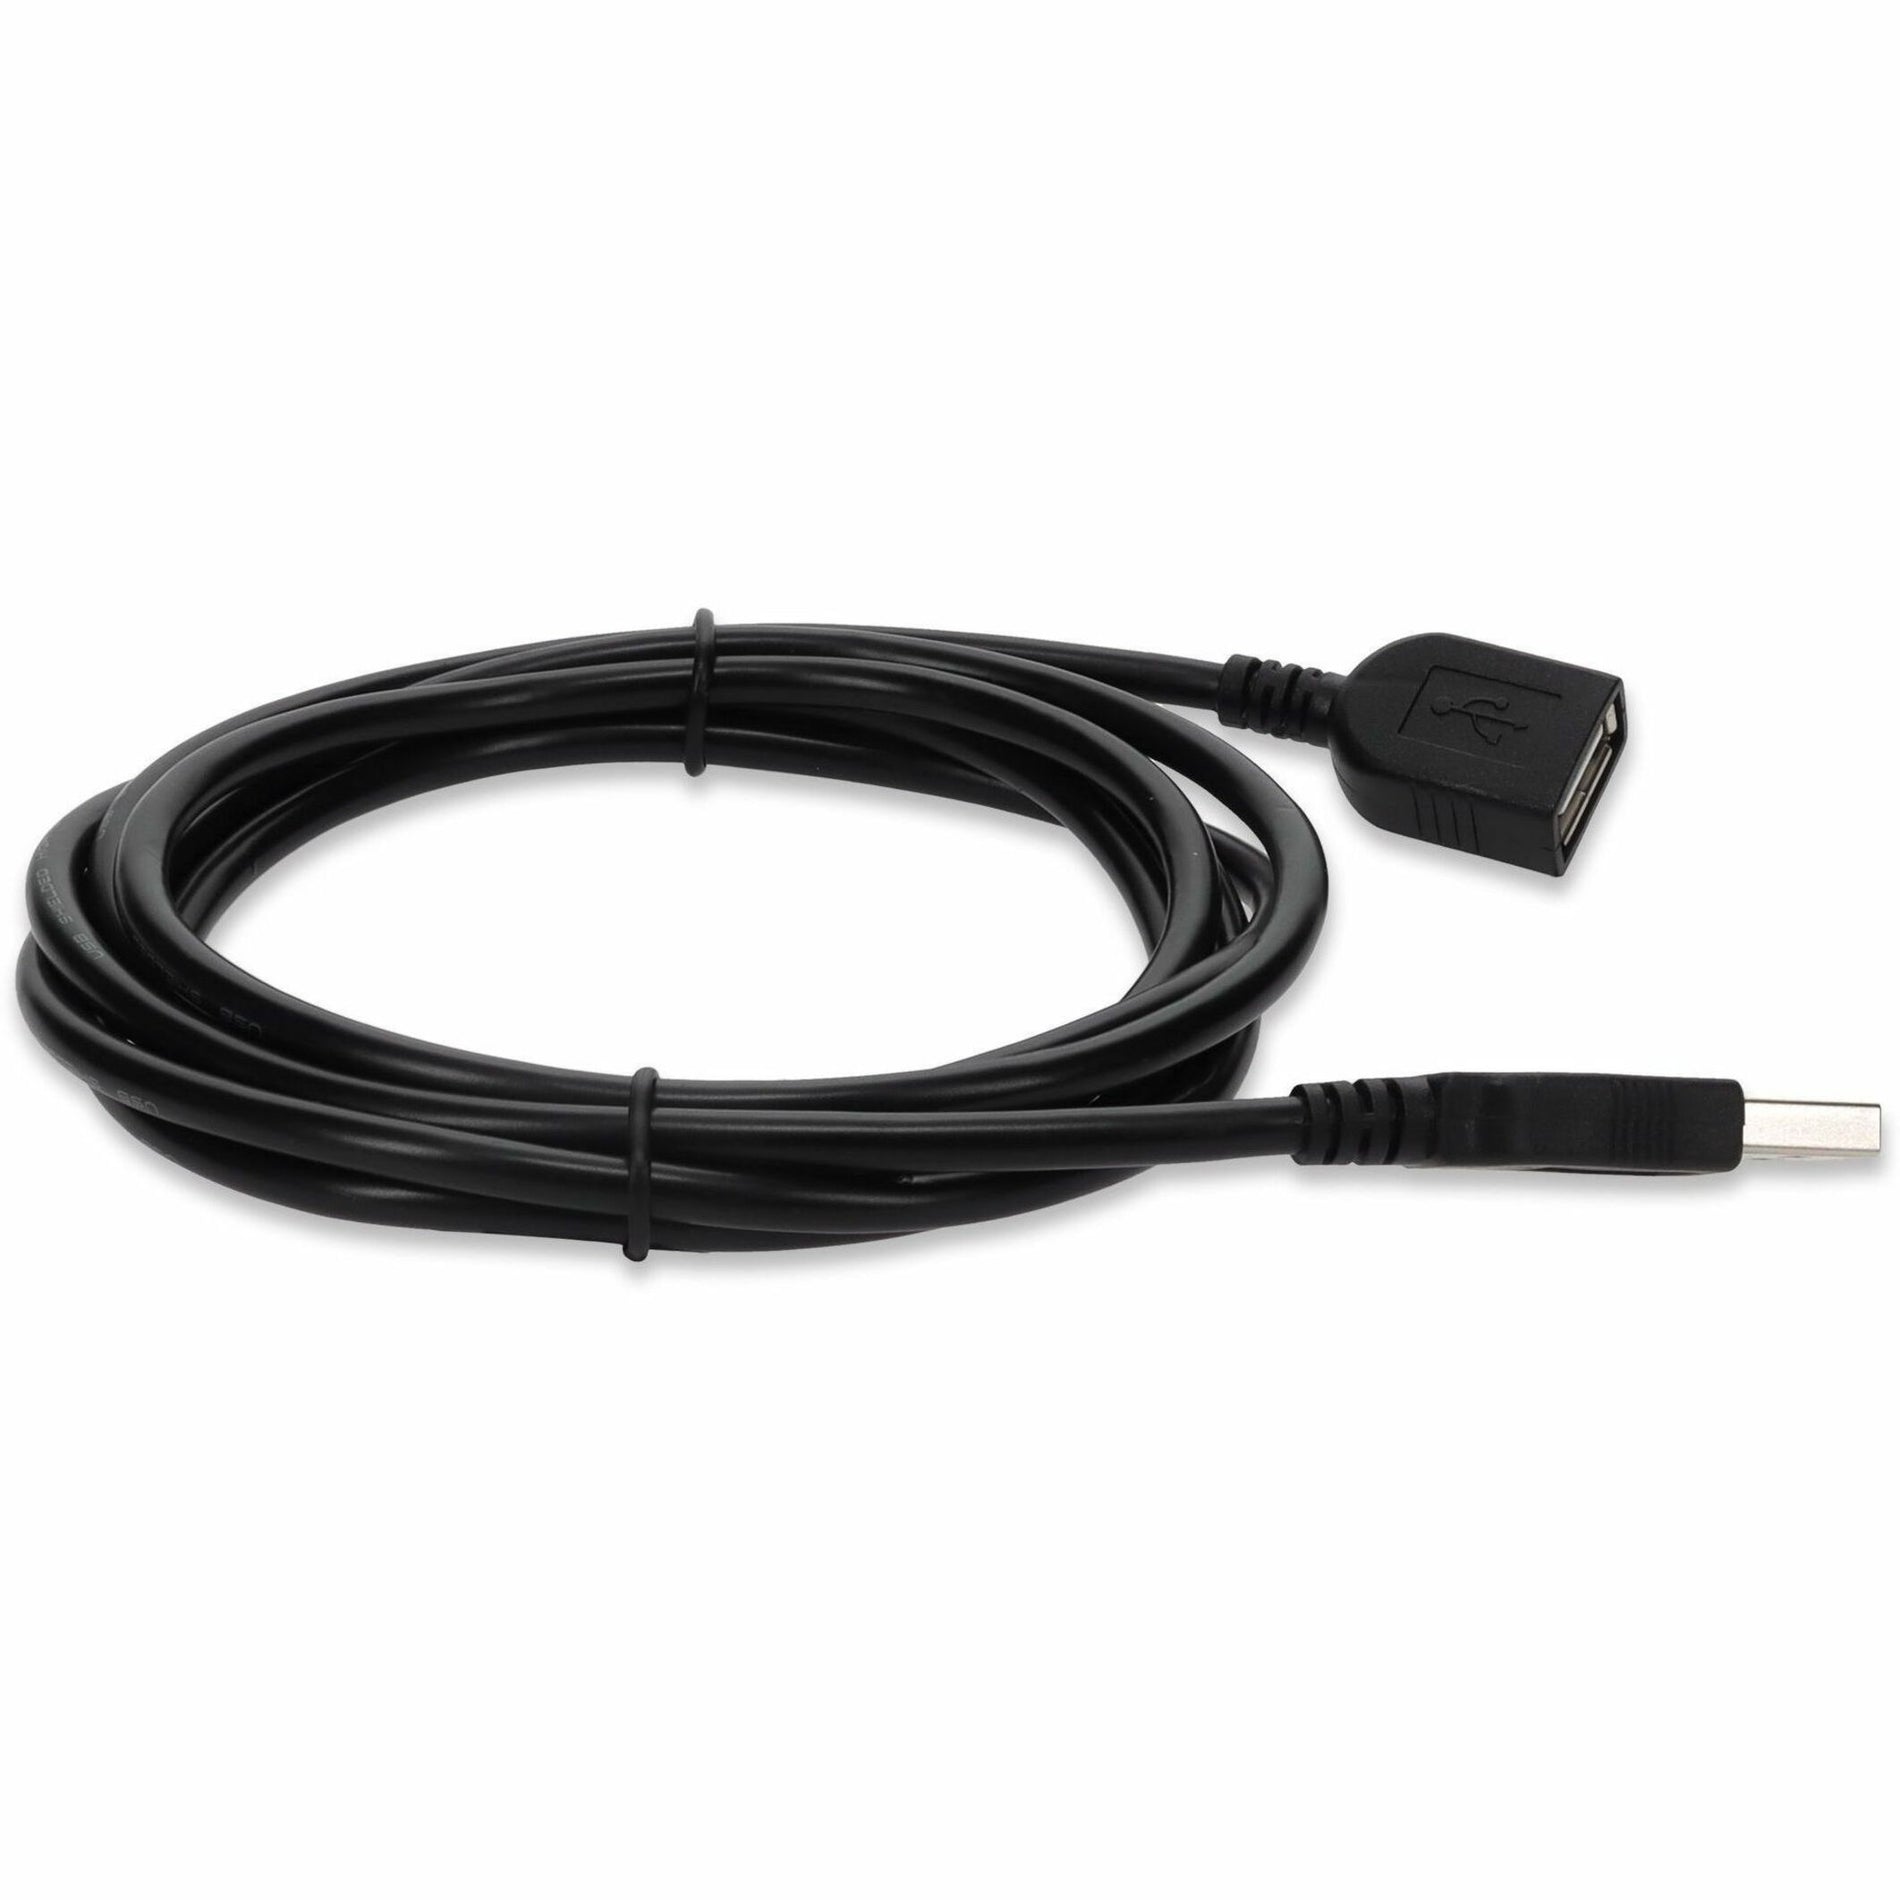 AddOn USBEXTAA15 15ft USB 2.0 A to A Active Extension Cable - M/F, 15ft Black Cable